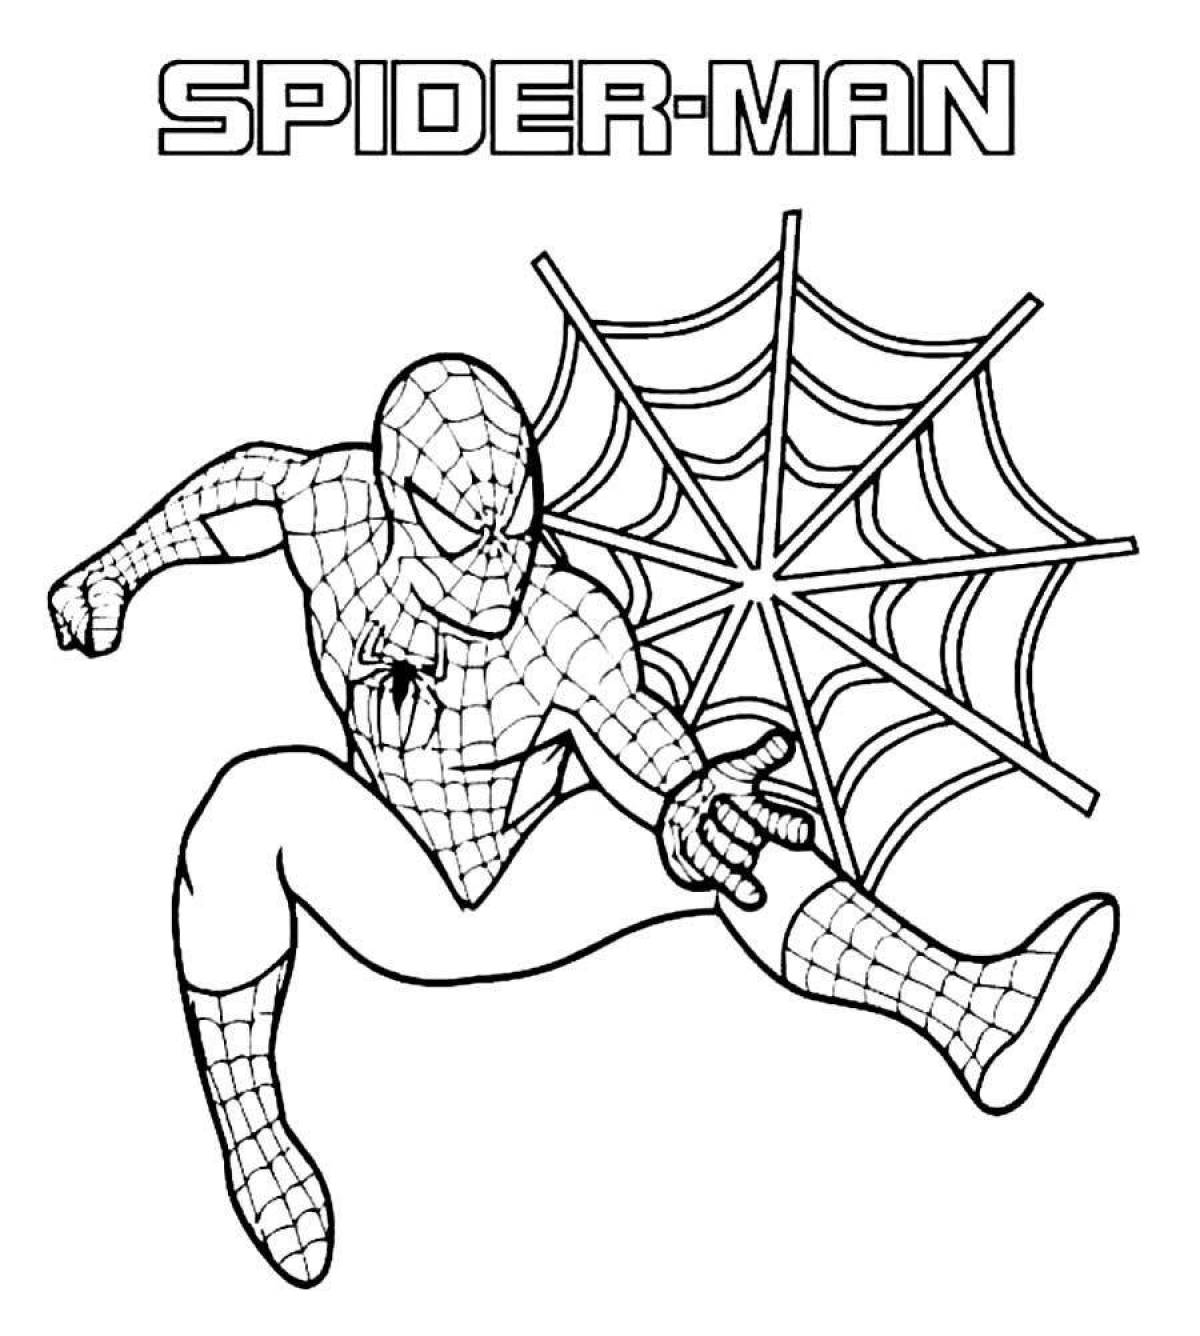 Spider-man coloring page brightly colored